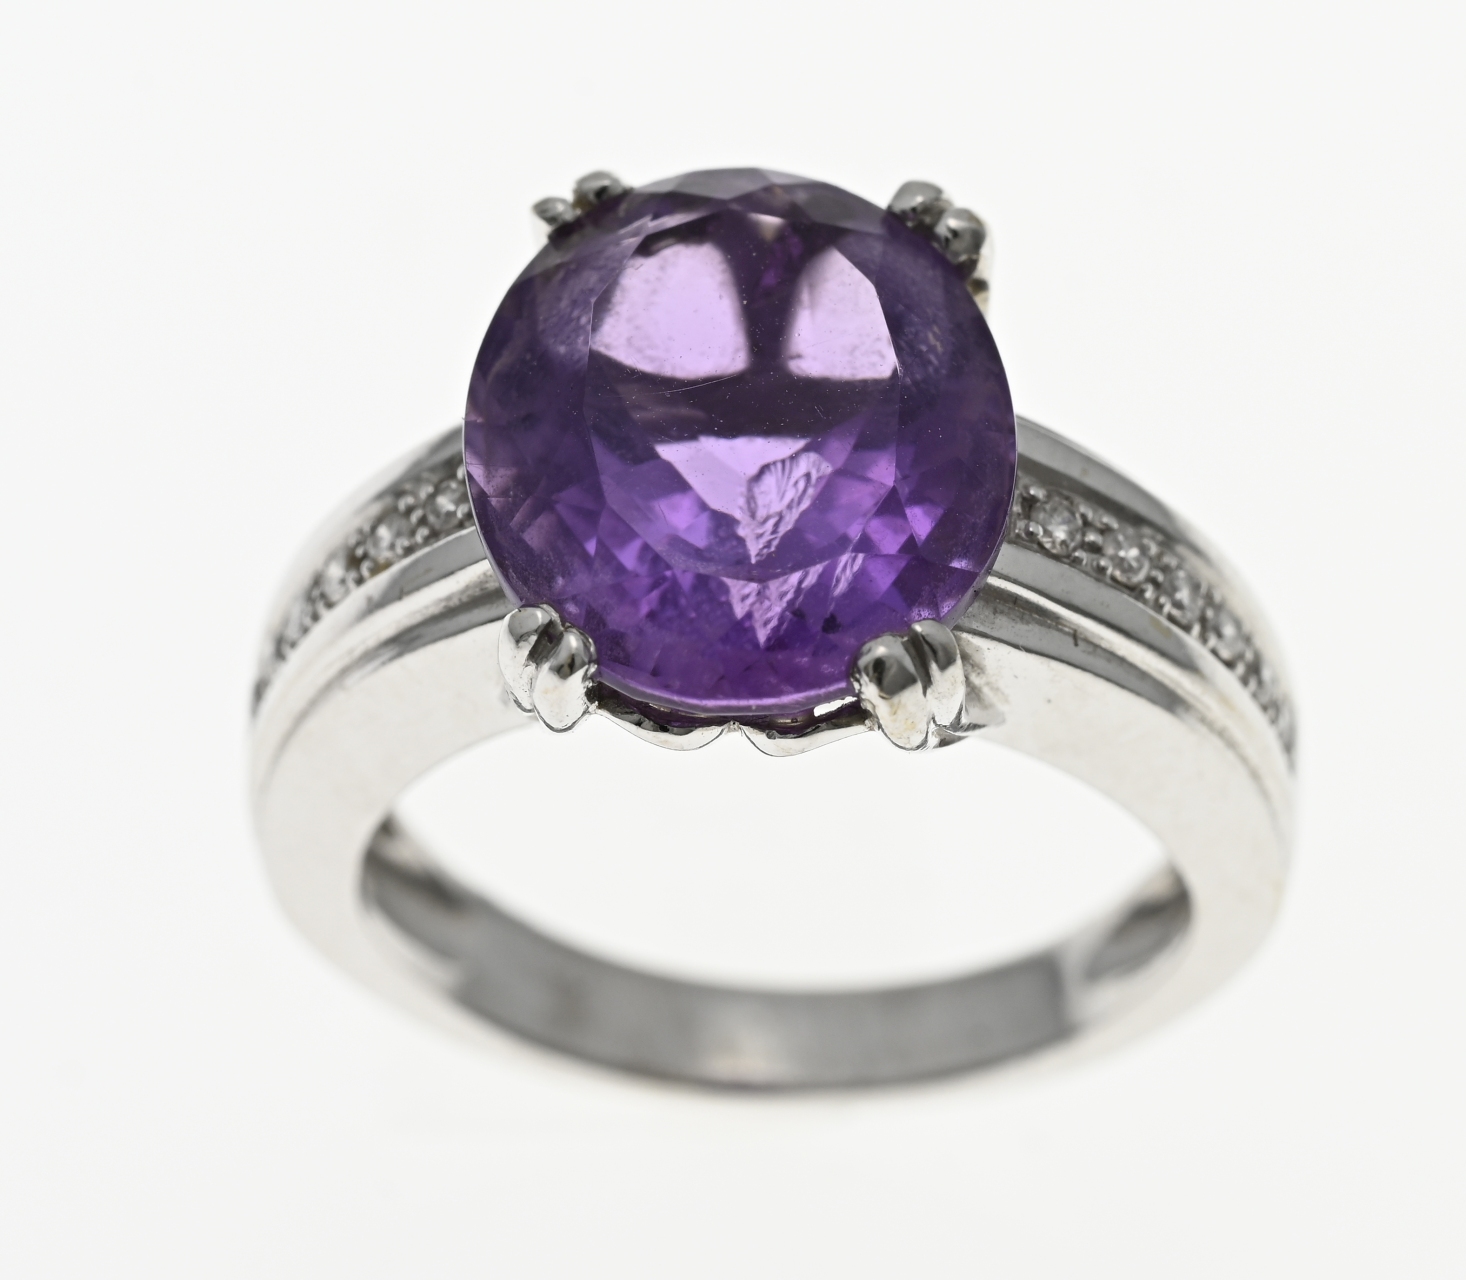 White gold ring with amethyst